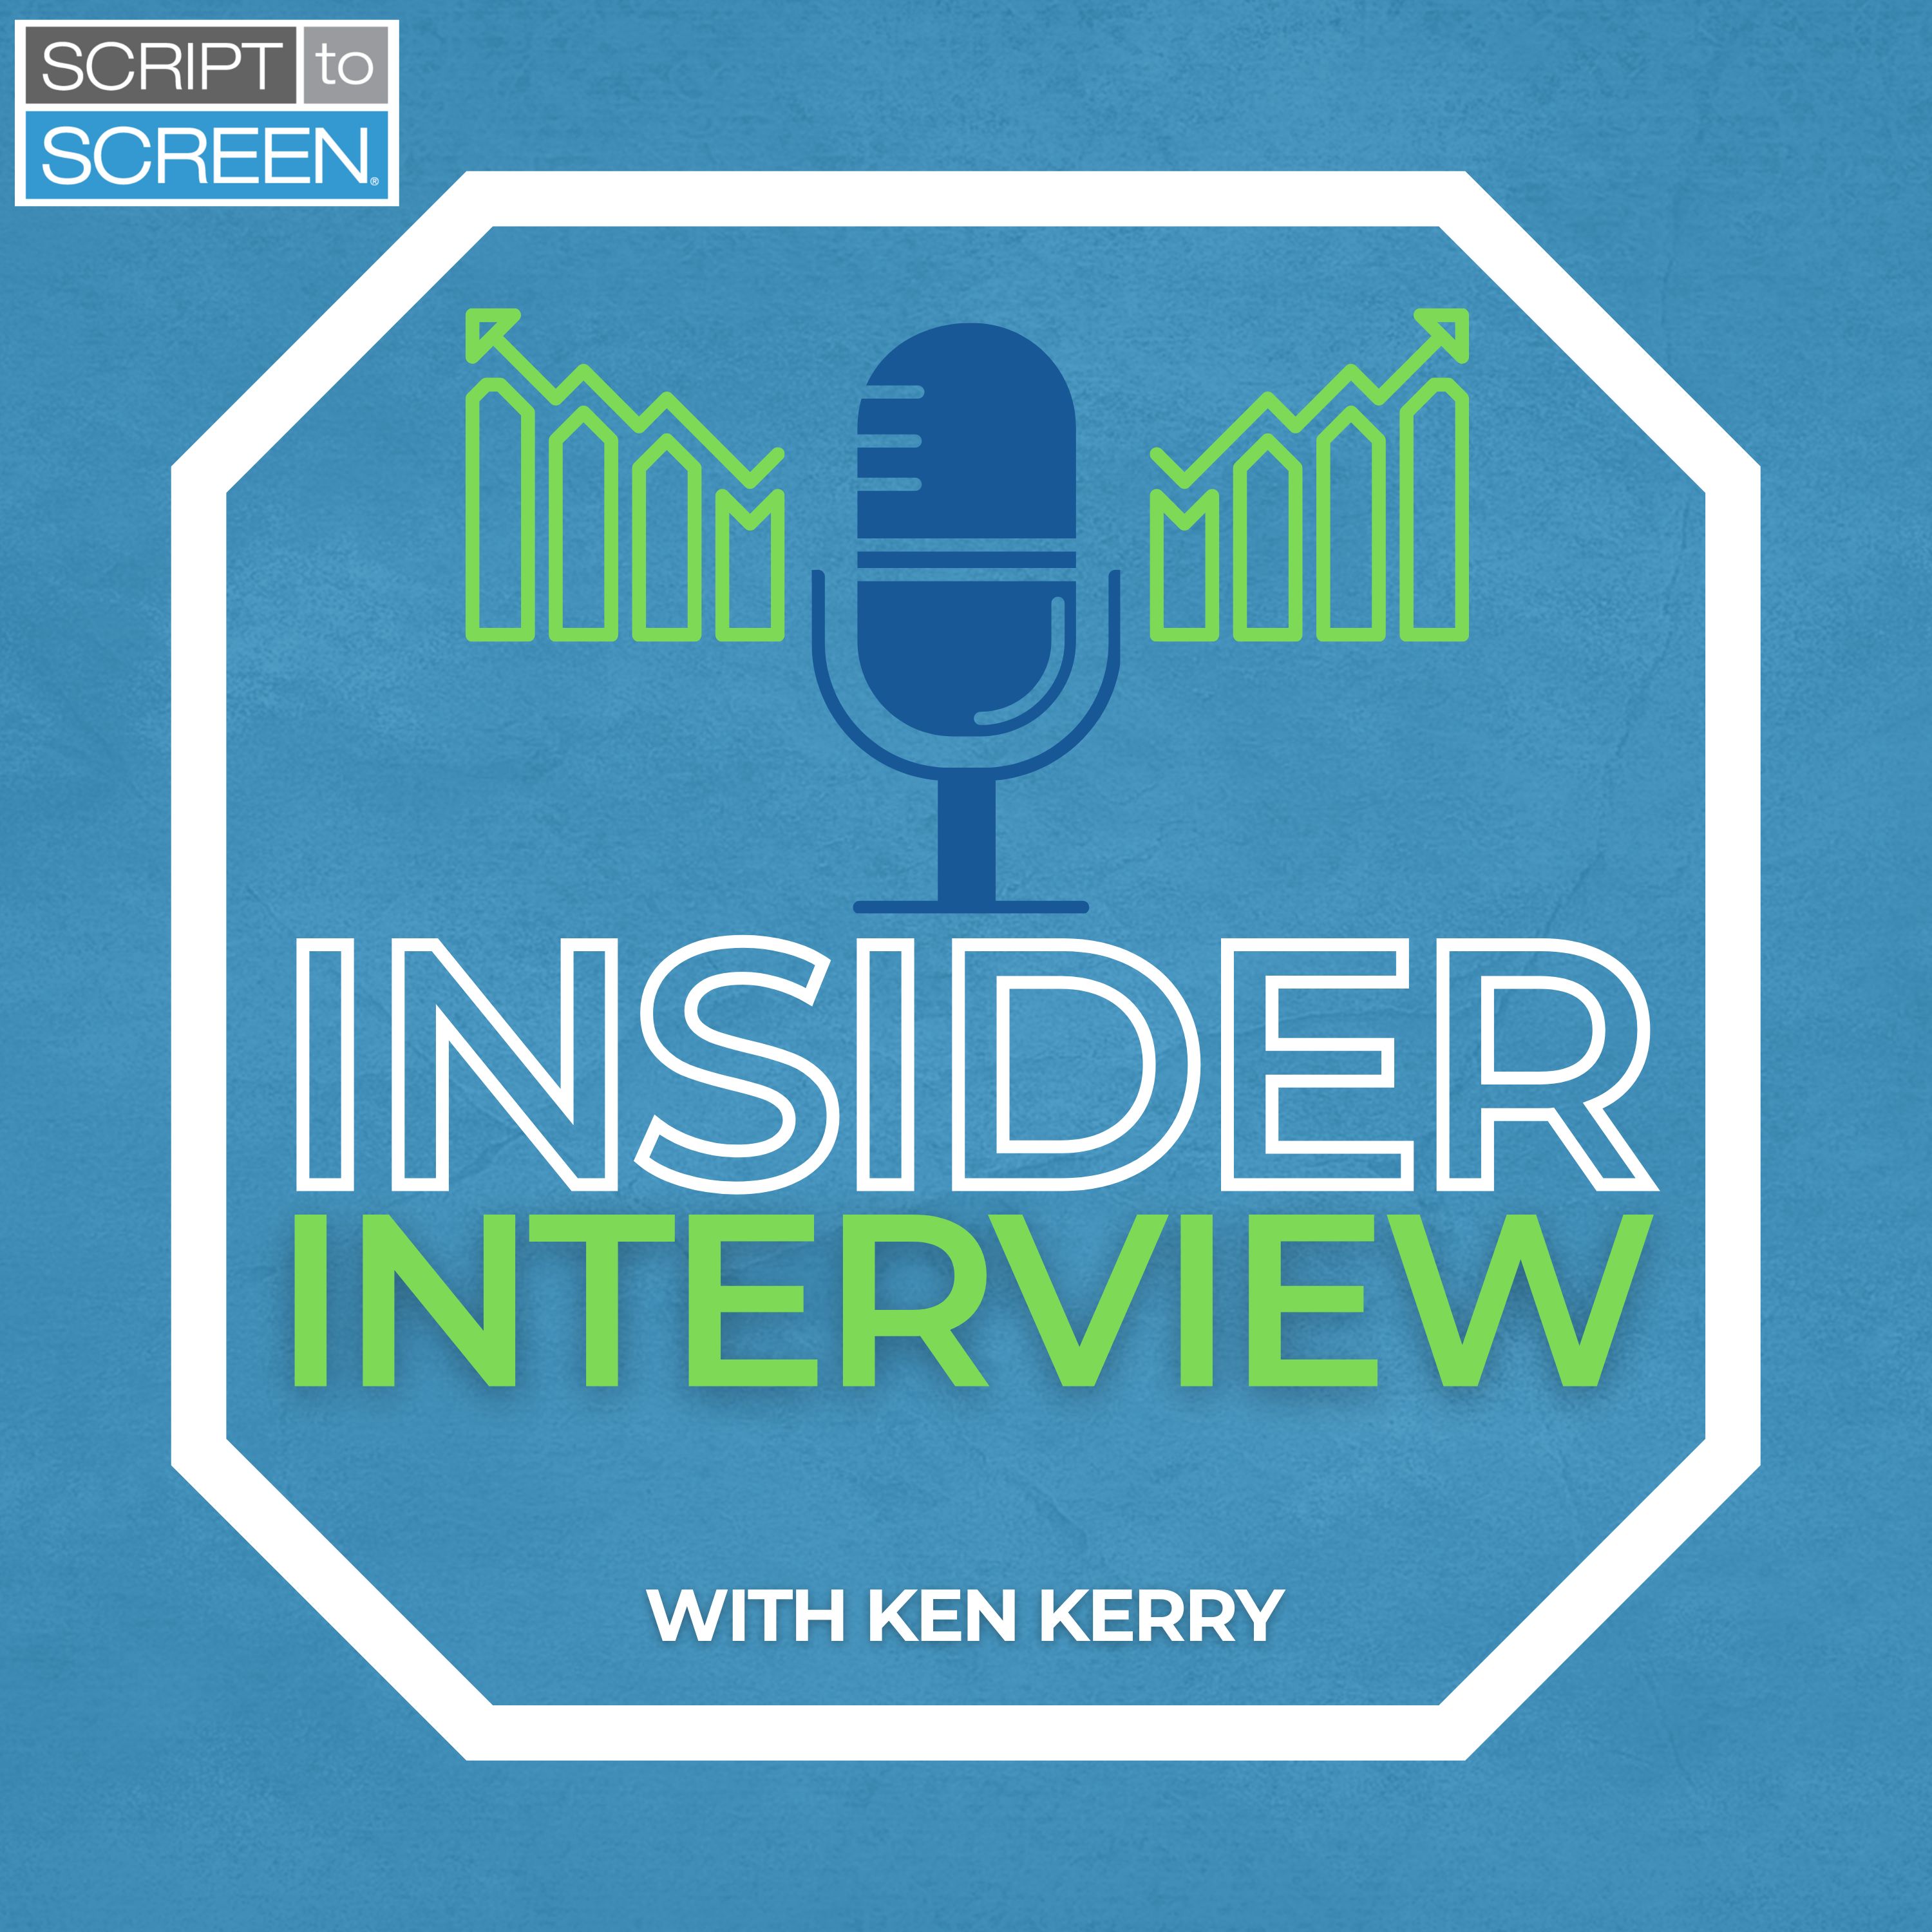 Insider Interview with Ken Kerry